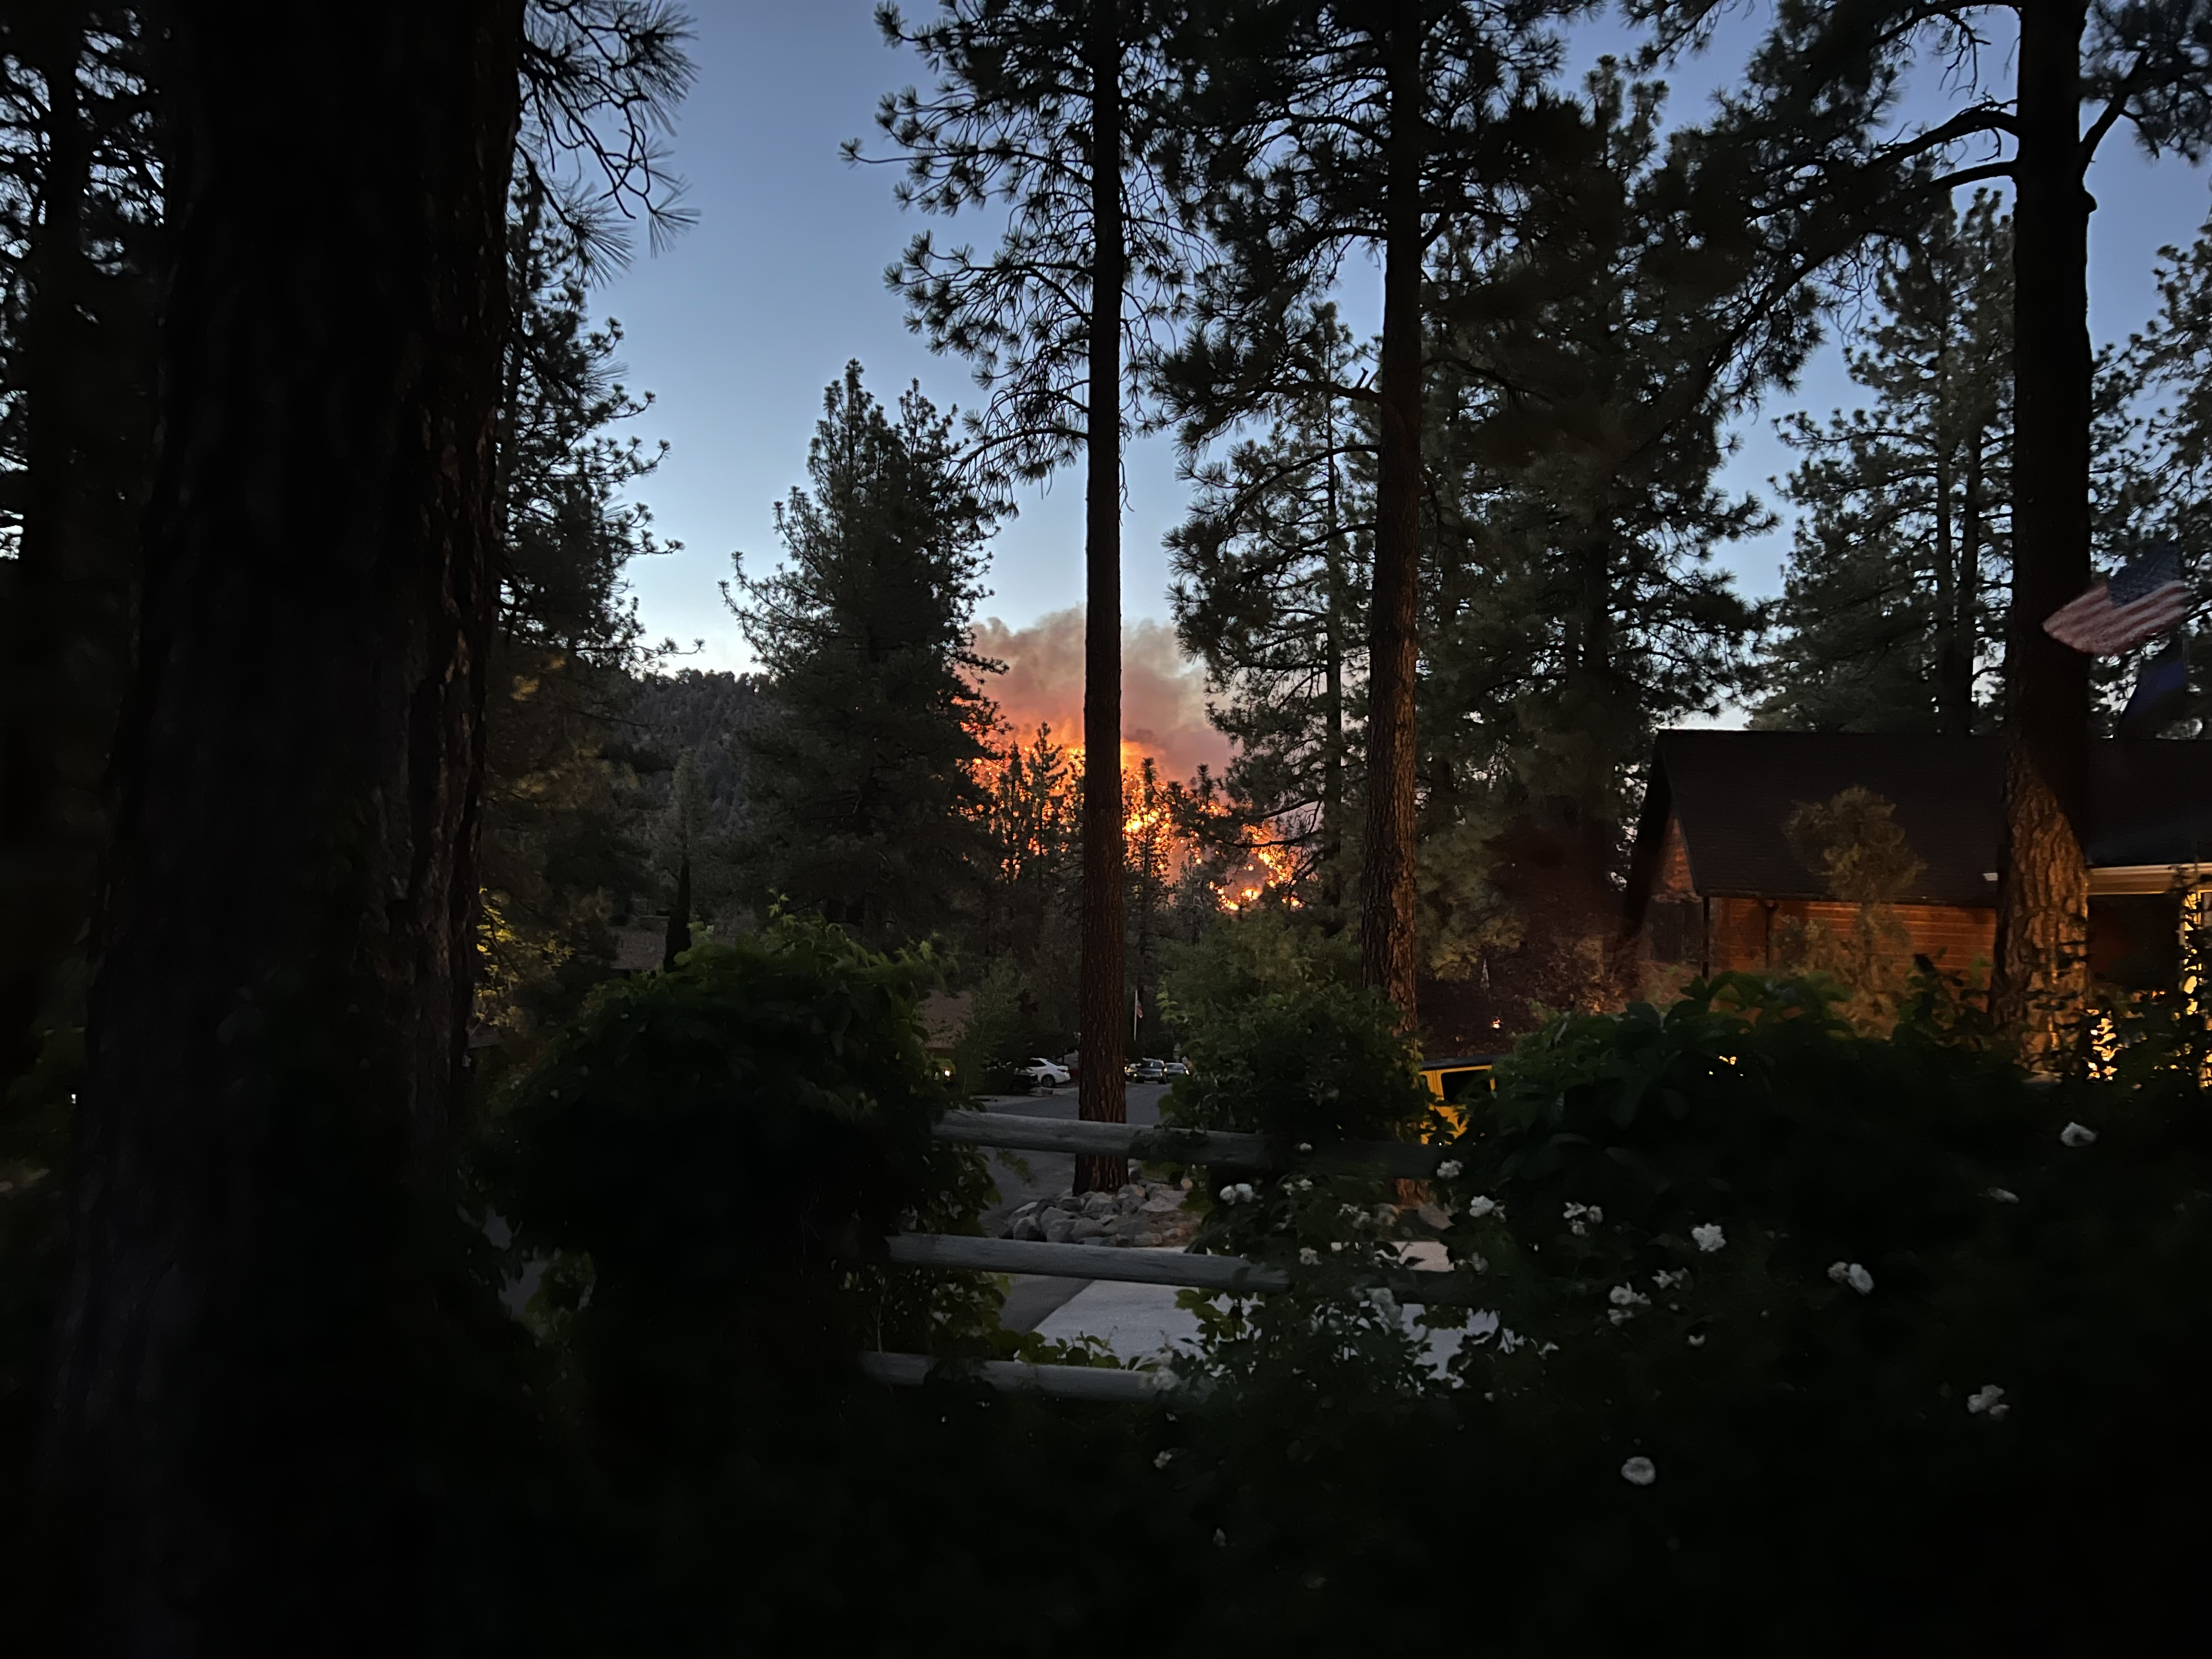 The Sheep Fire from Wrightwood, CA. 6/11/22